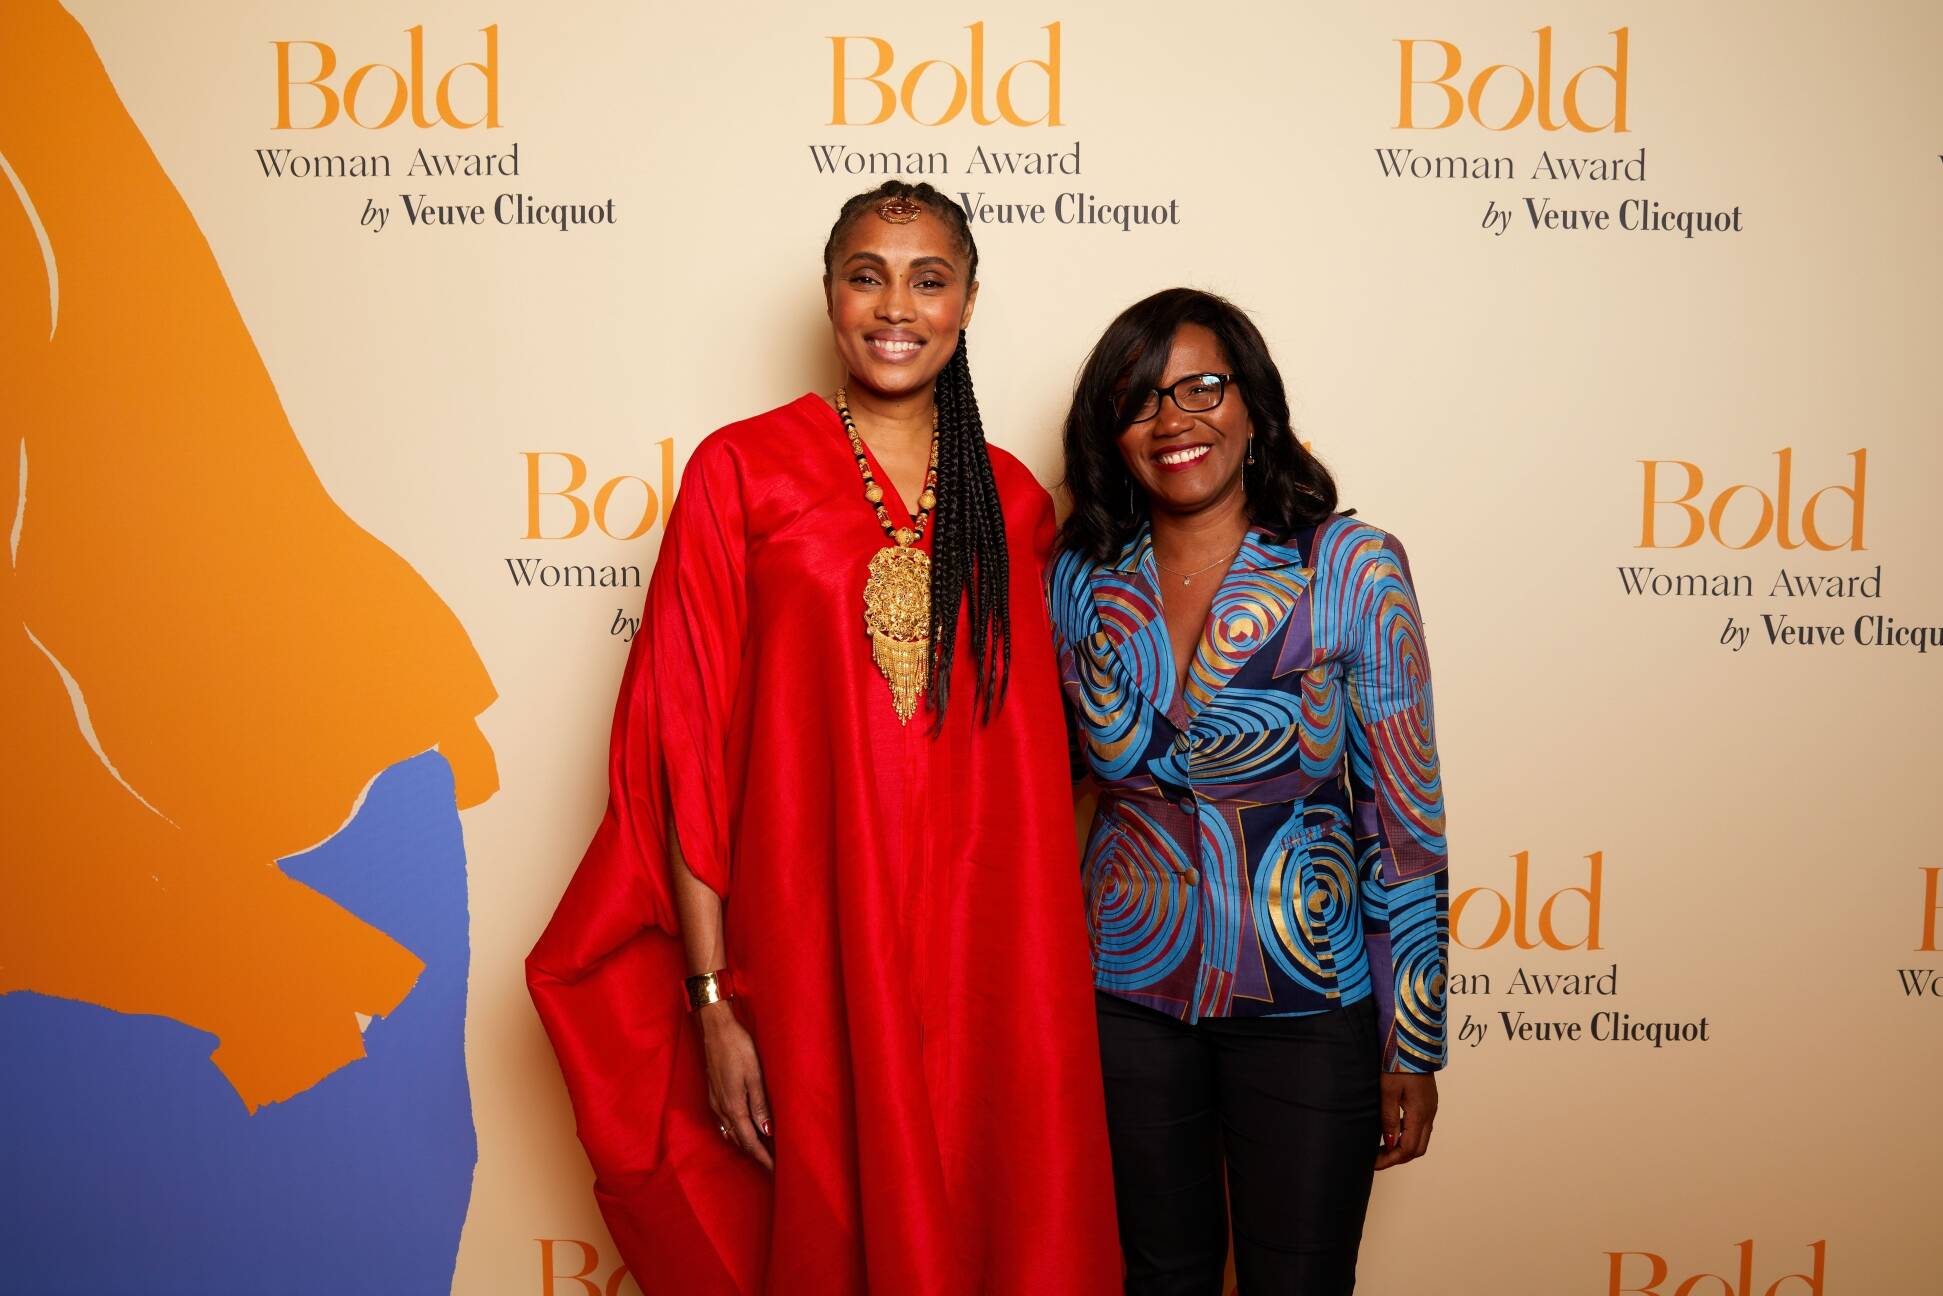 How was the 50th Bold Woman Award ceremony?